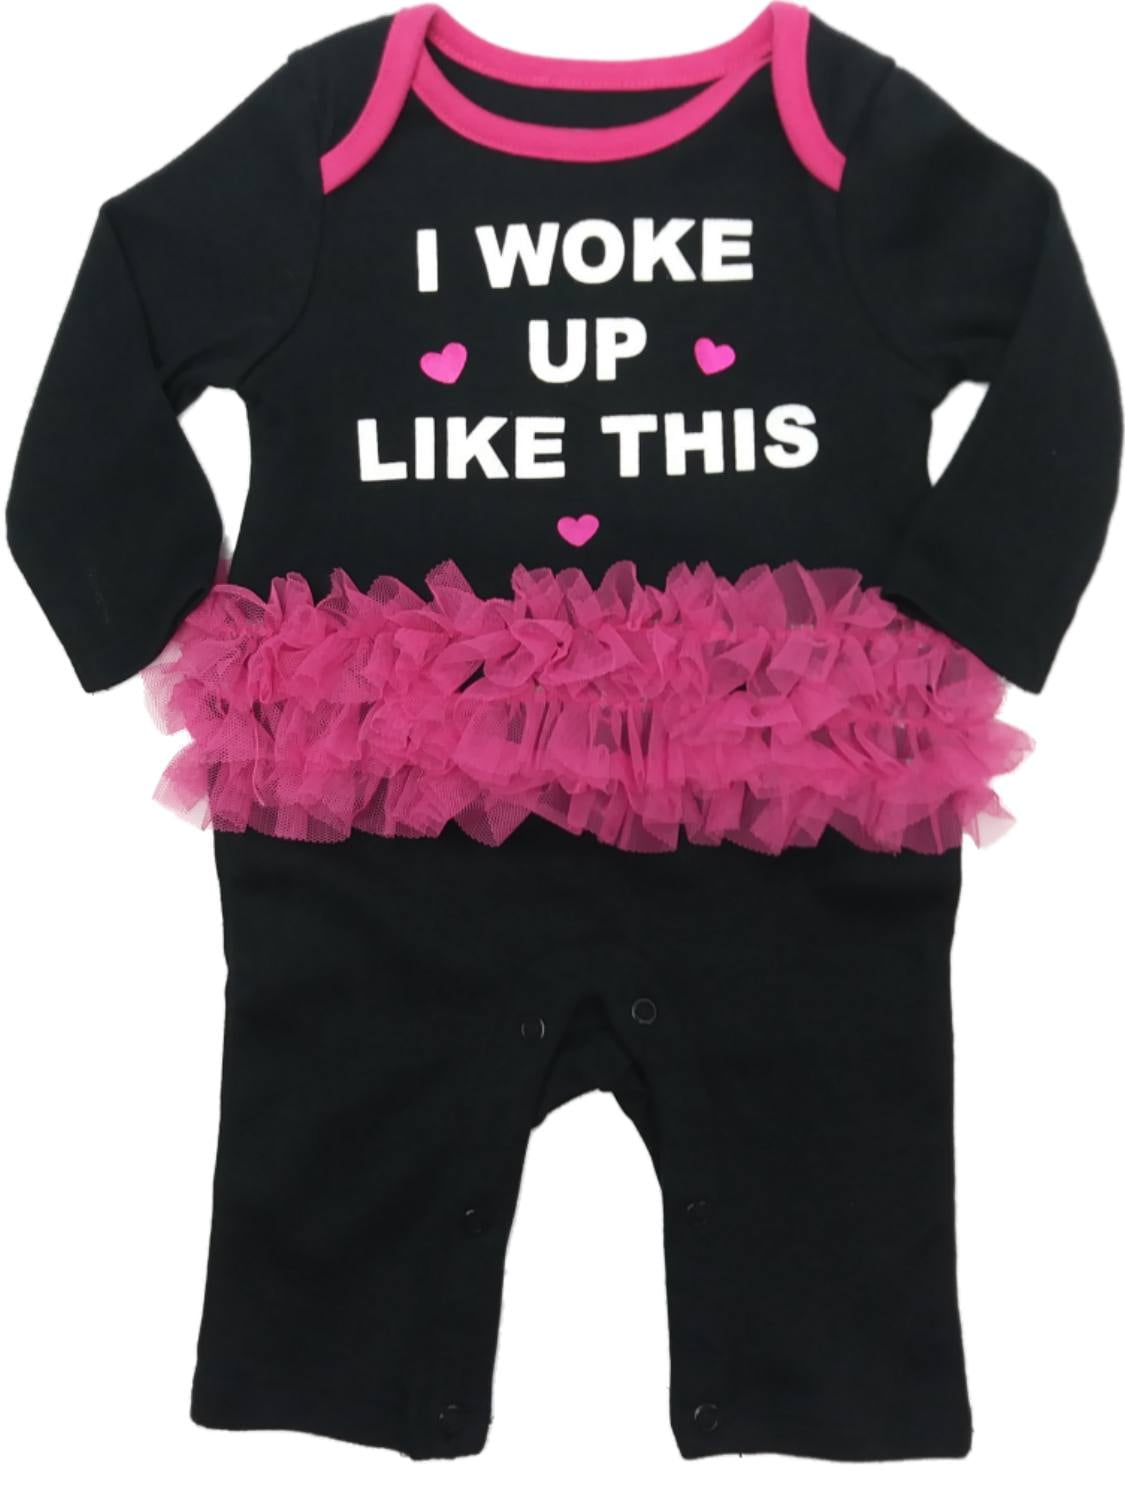 Freshly Squeezed Infant Baby Girls I Woke Up Like This Black & Pink Ruffle Coverall Outfit